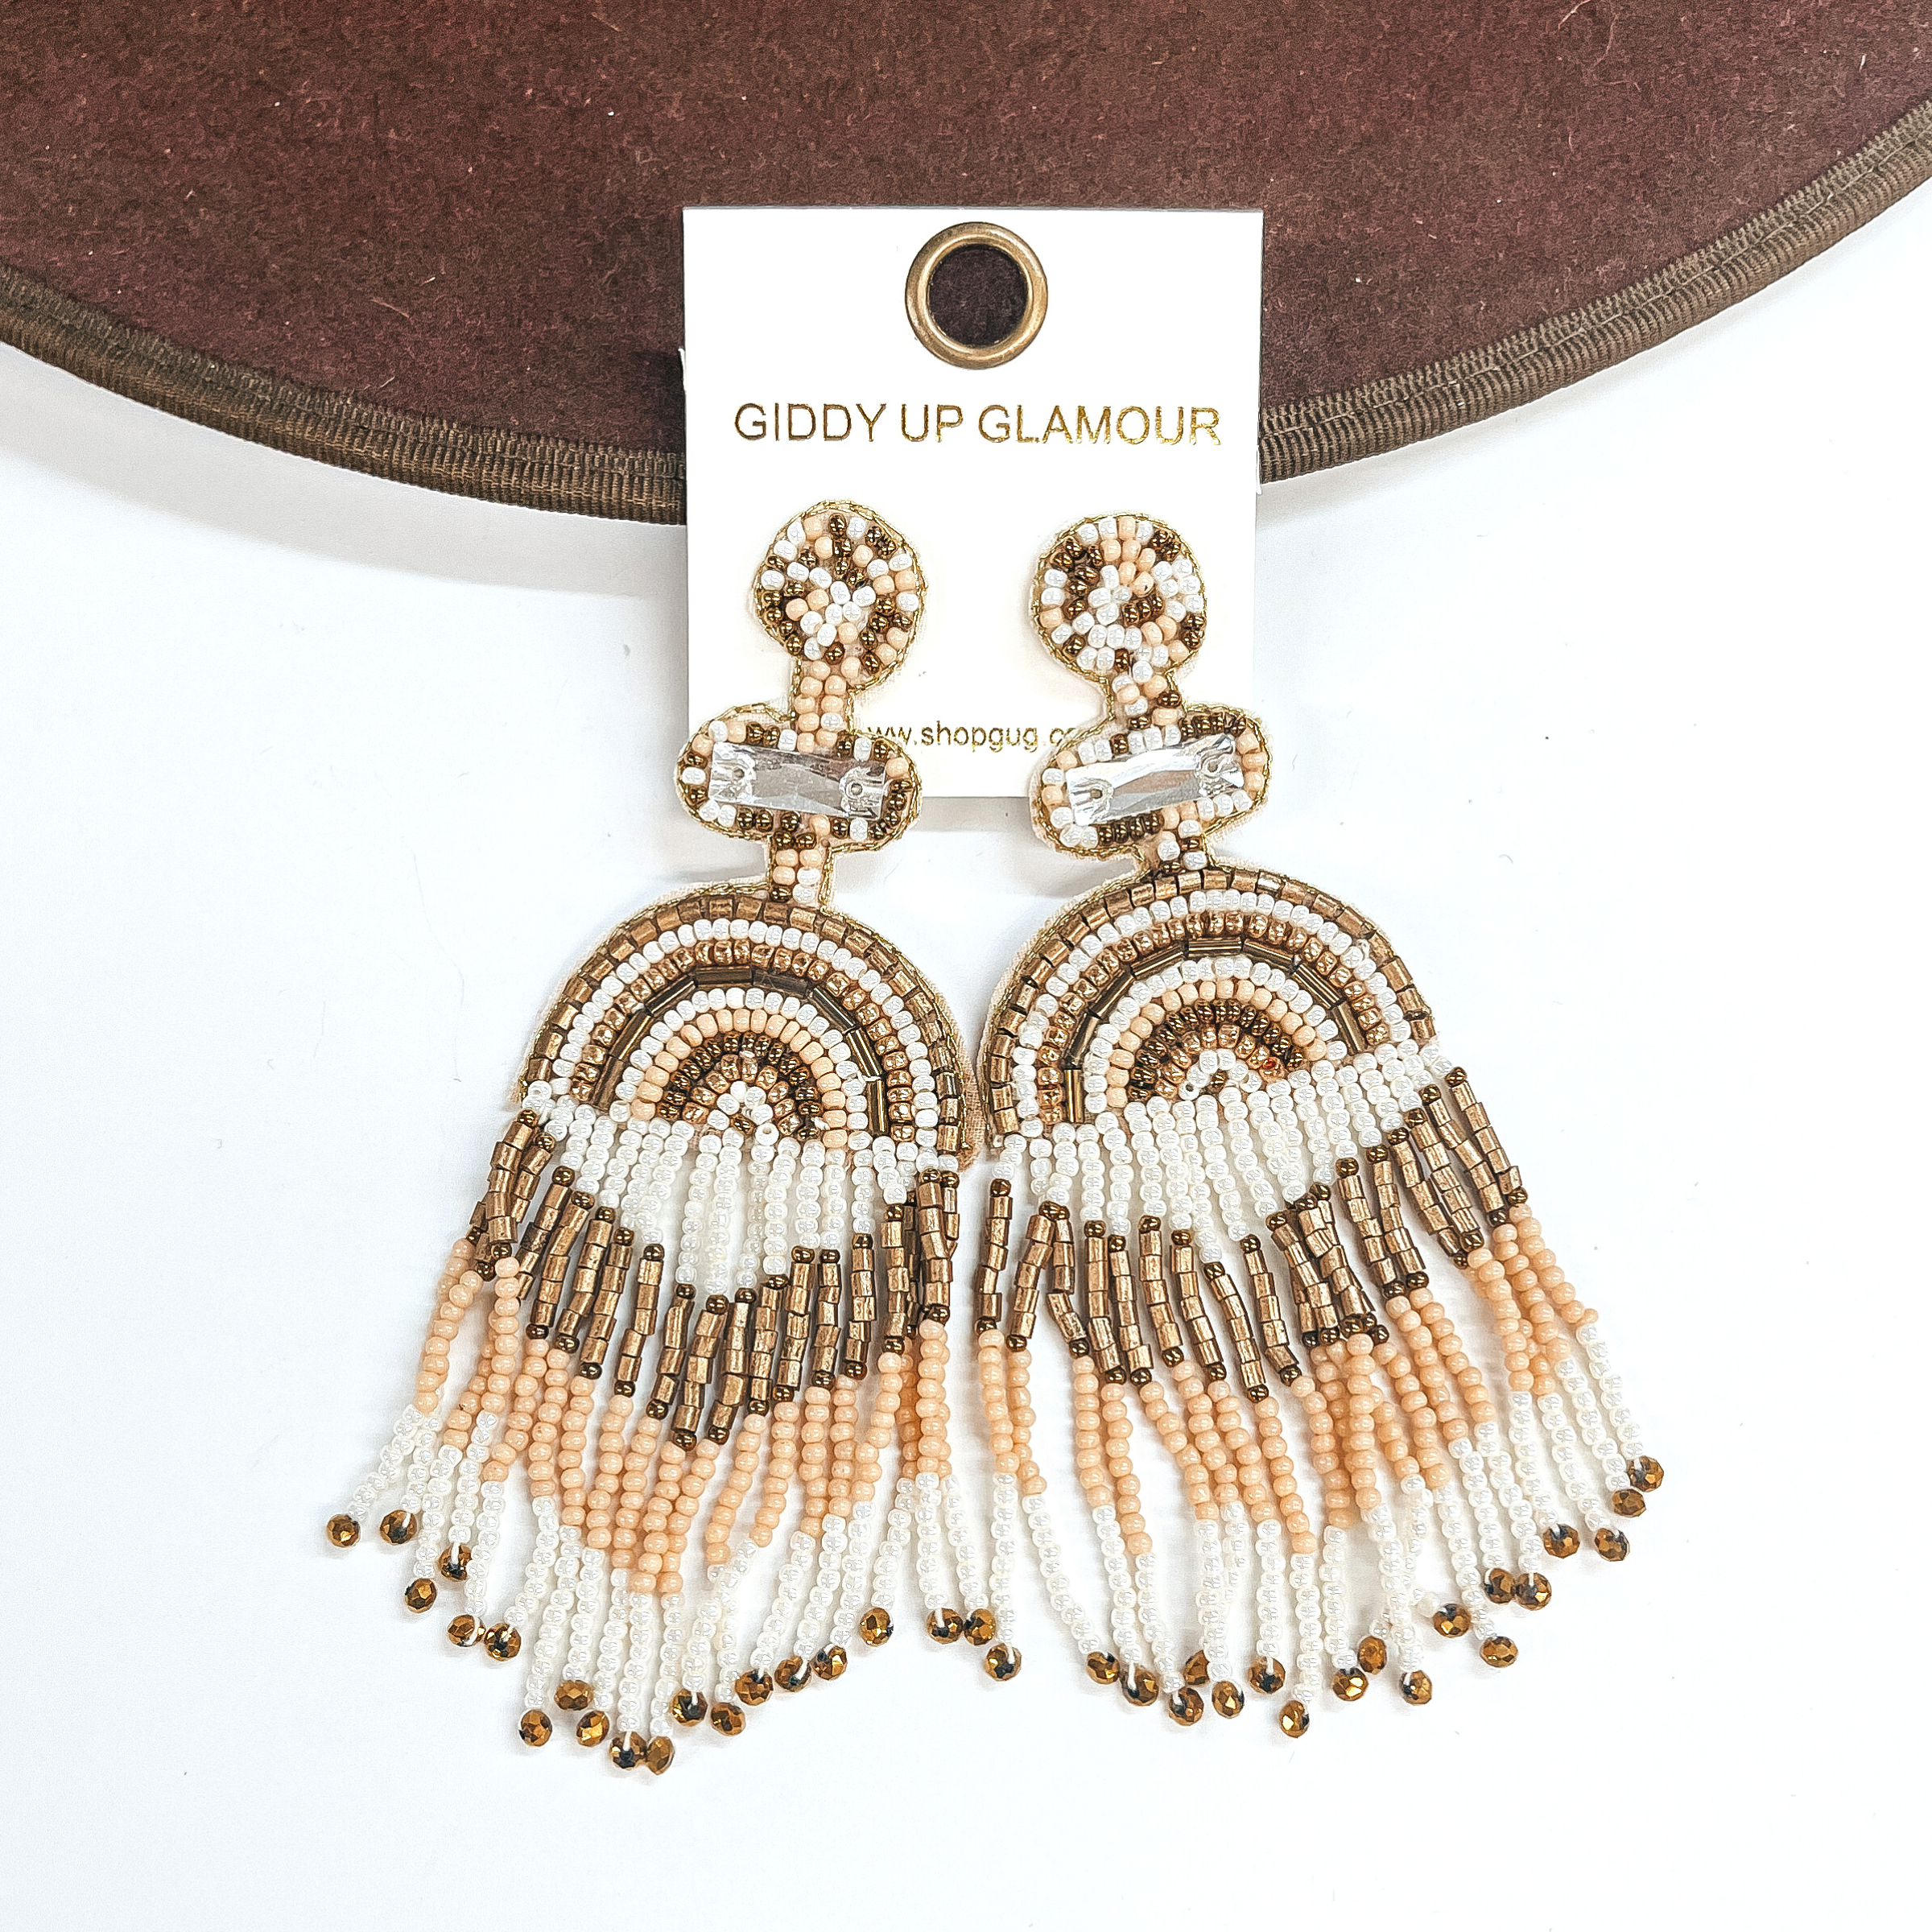 Balcony Views Seed Bead Fringe Earrings in Ivory and Gold - Giddy Up Glamour Boutique